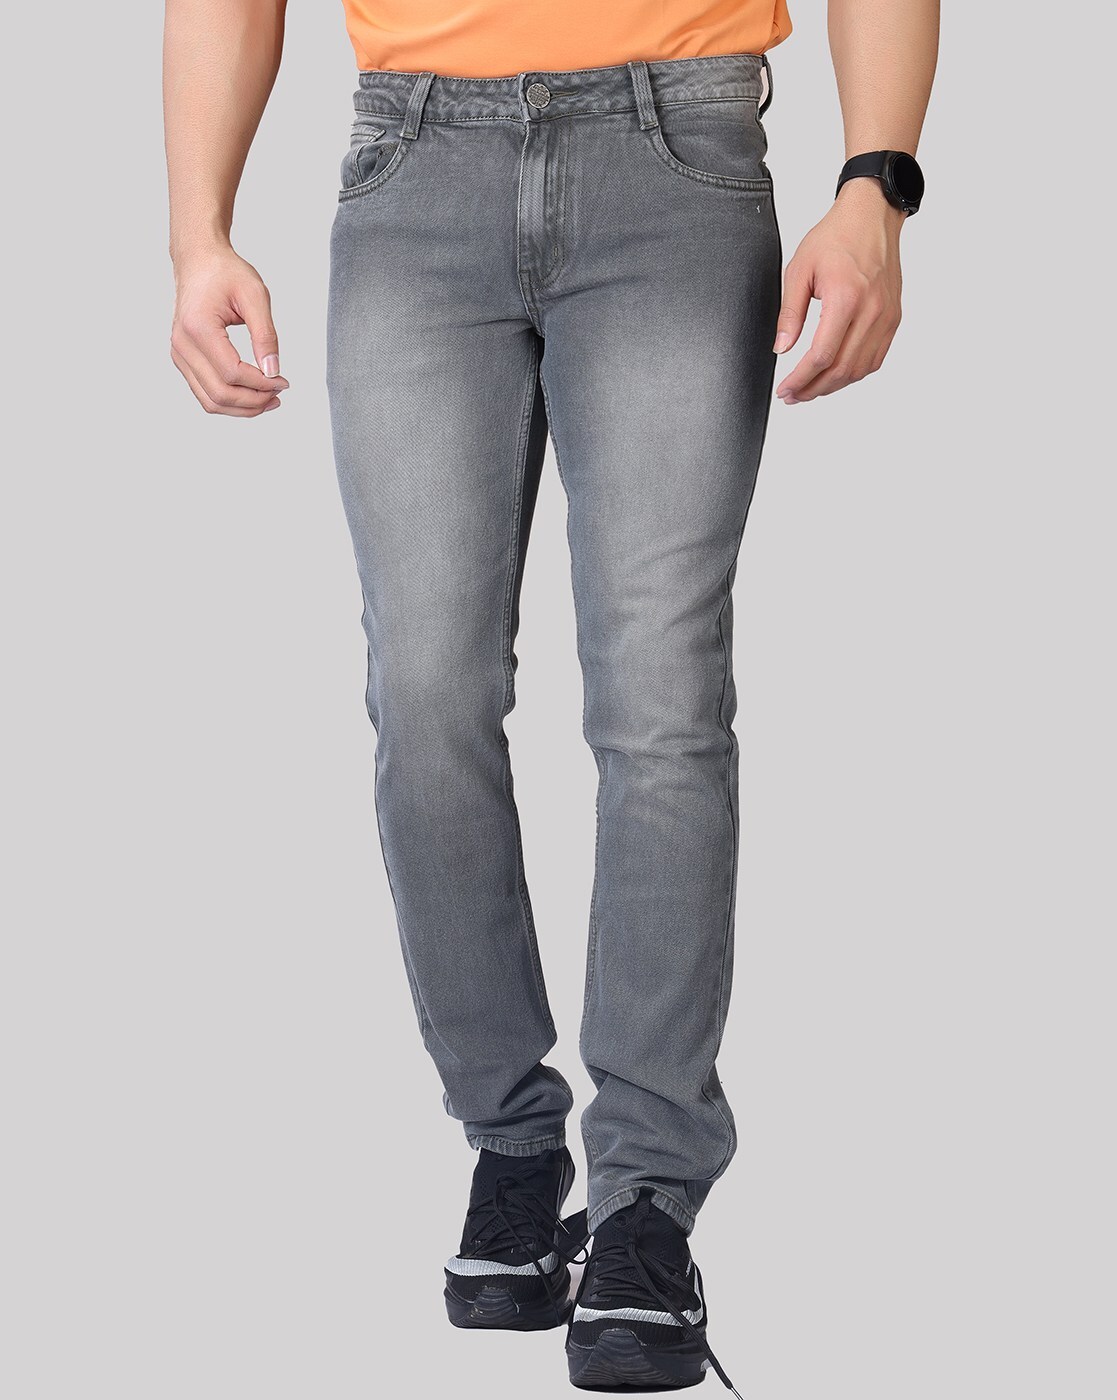 Buy Grey Jeans for Men by Forca by Lifestyle Online | Ajio.com